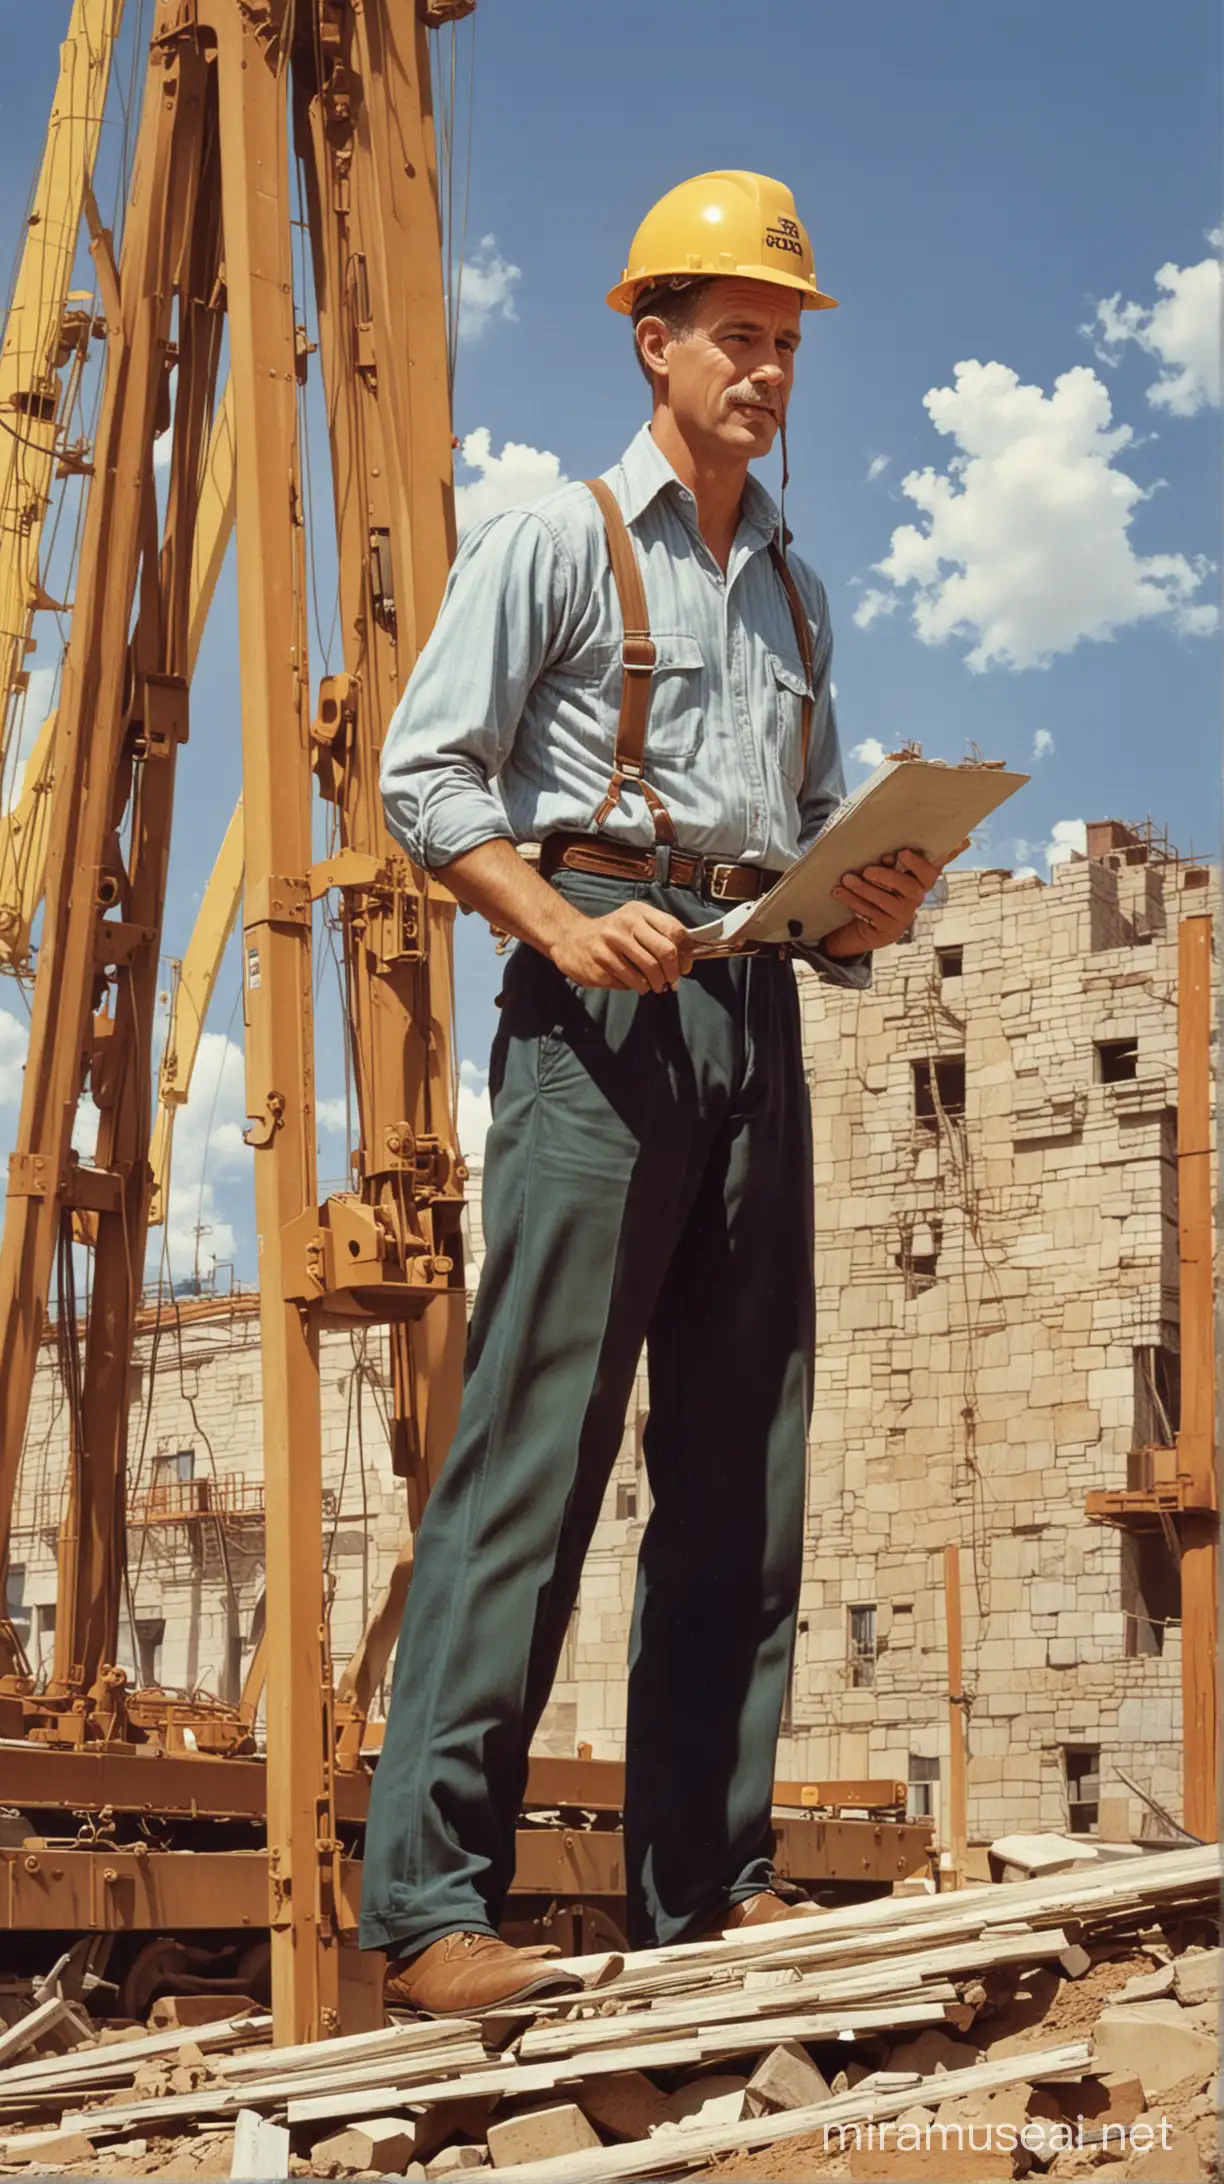 Vintage Civil Engineer in Action 1970s Era Norman Rockwell Style